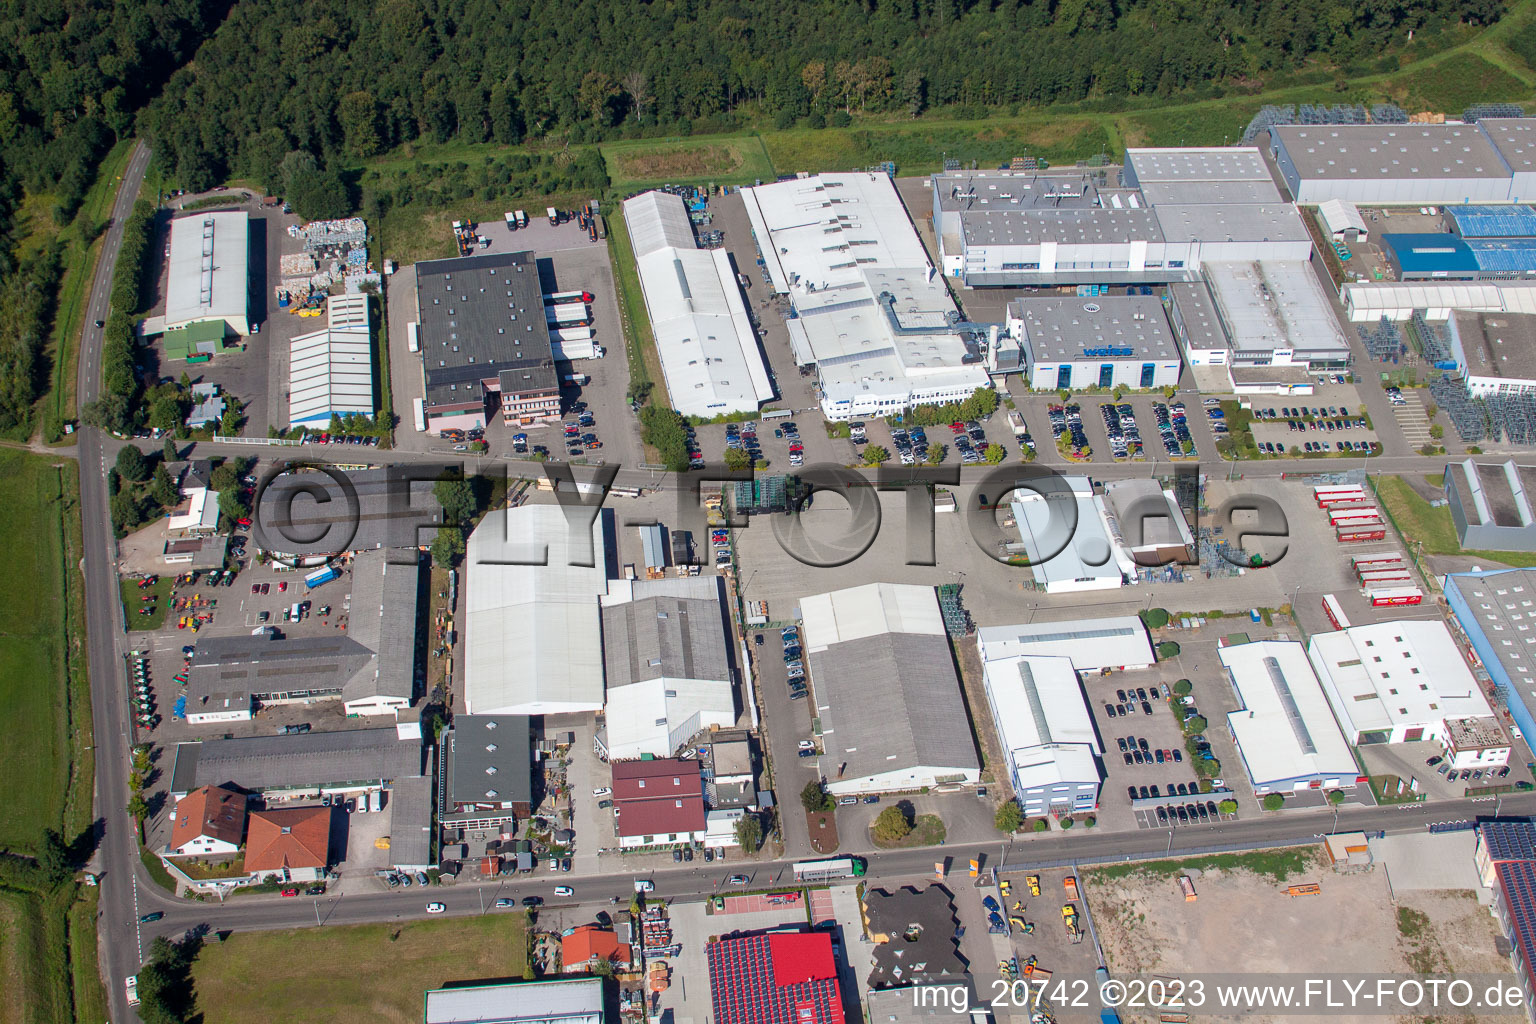 Industrial area in Appenweier in the state Baden-Wuerttemberg, Germany from the plane